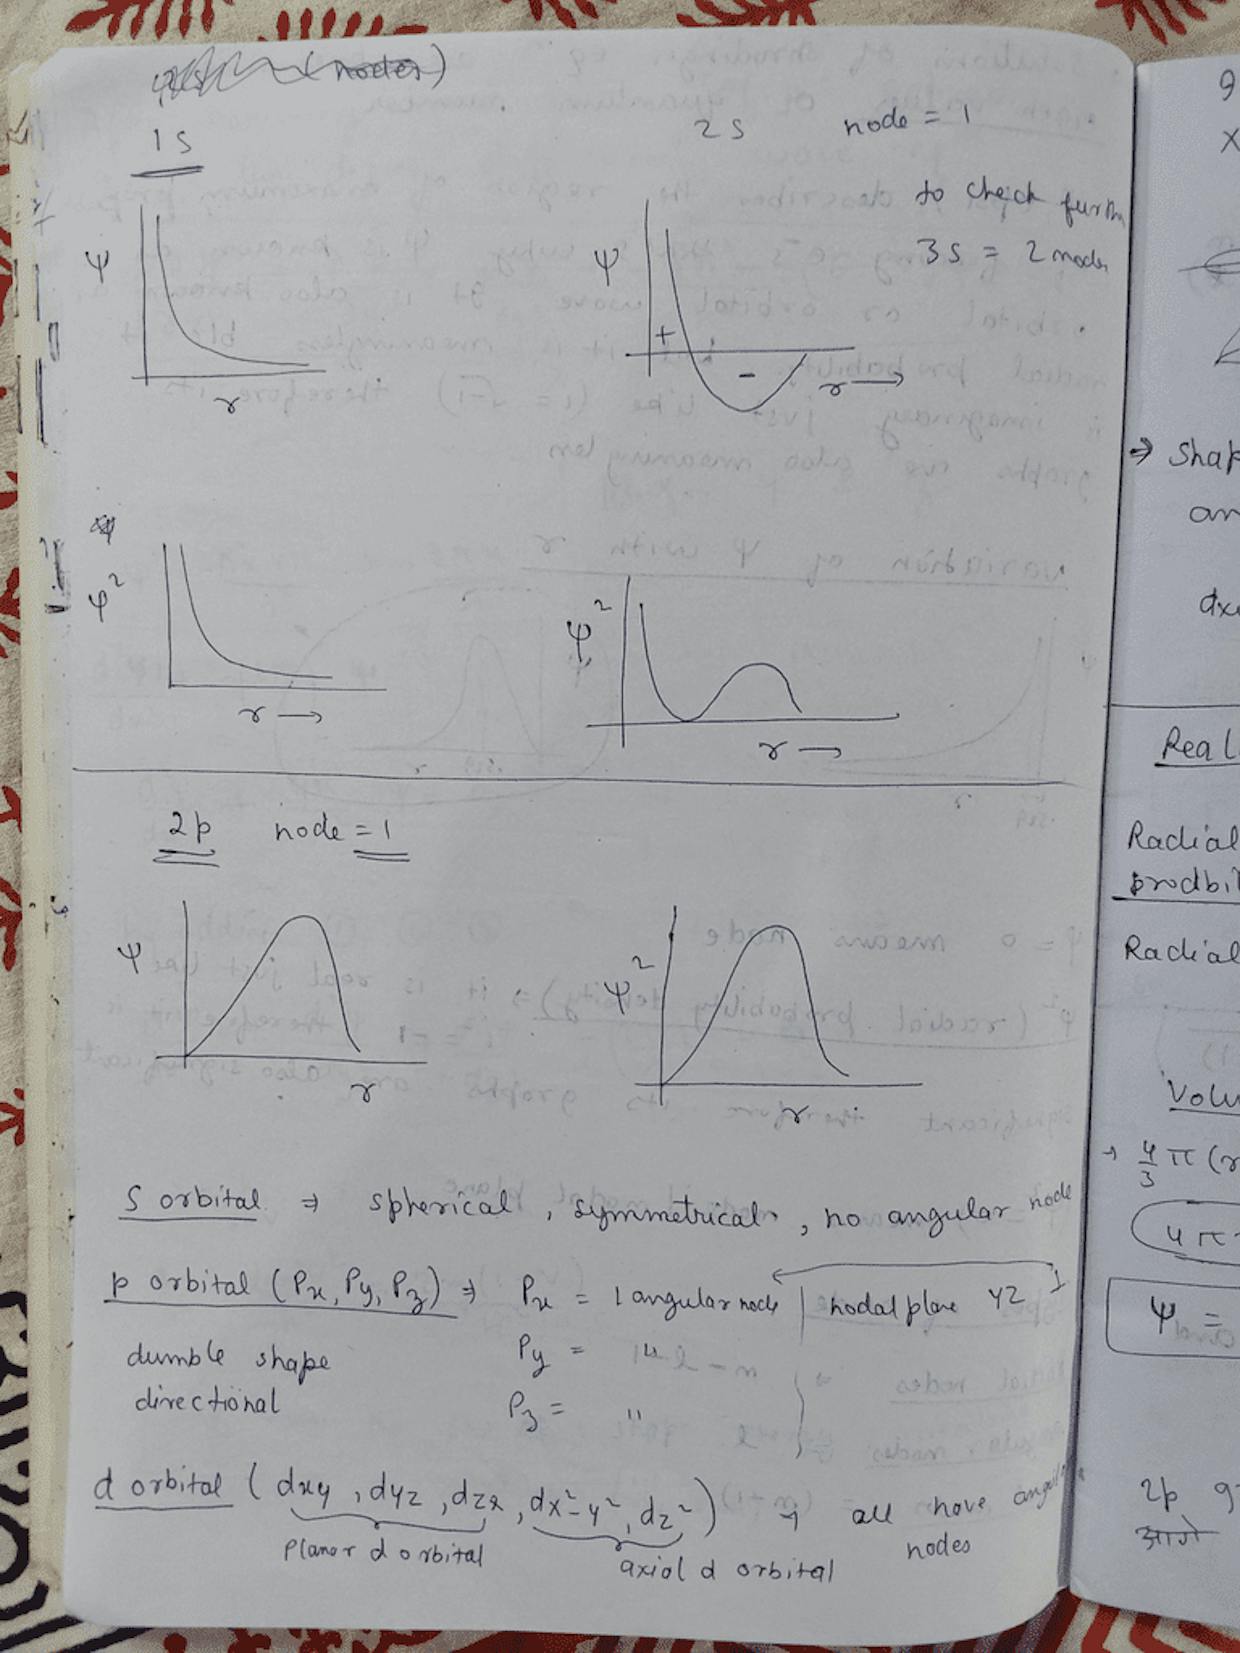 What is Schodinger wave equation ?